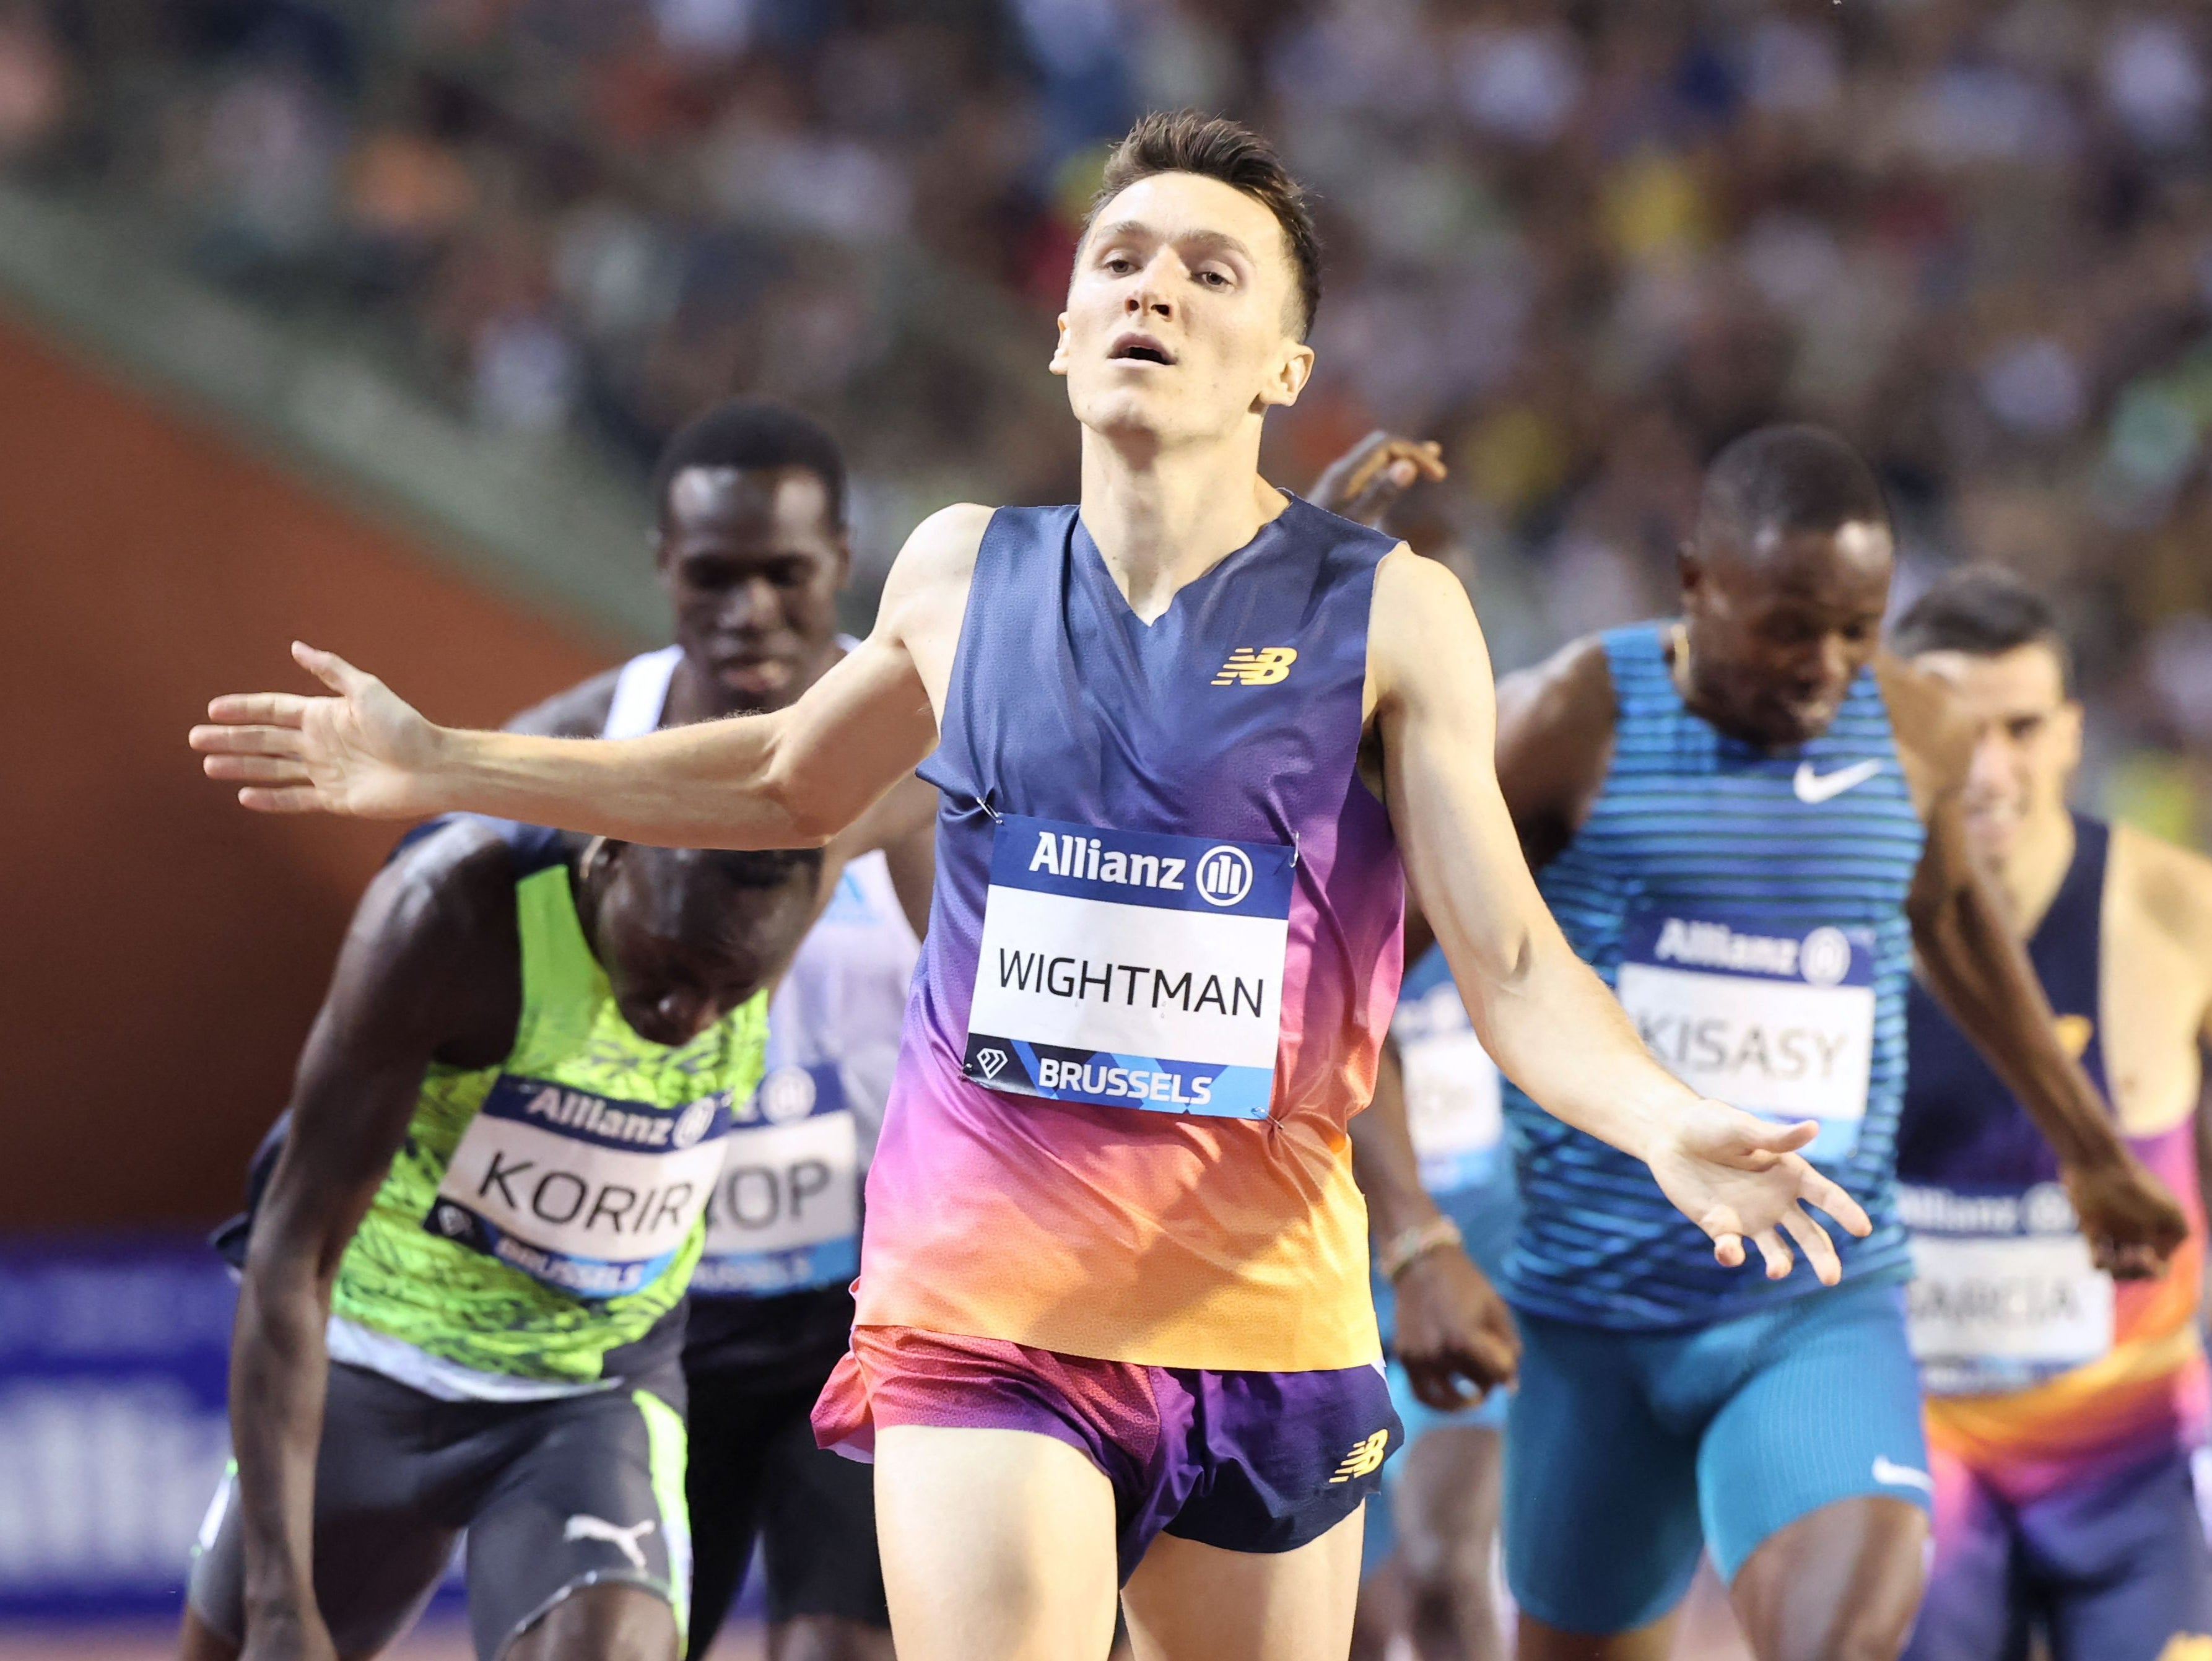 Jake Wightman wins the men’s 800m event during the IAAF Diamond League ‘Memorial Van Damme’ athletics meeting at the King Baudouin Stadium in Brussels on 2 September